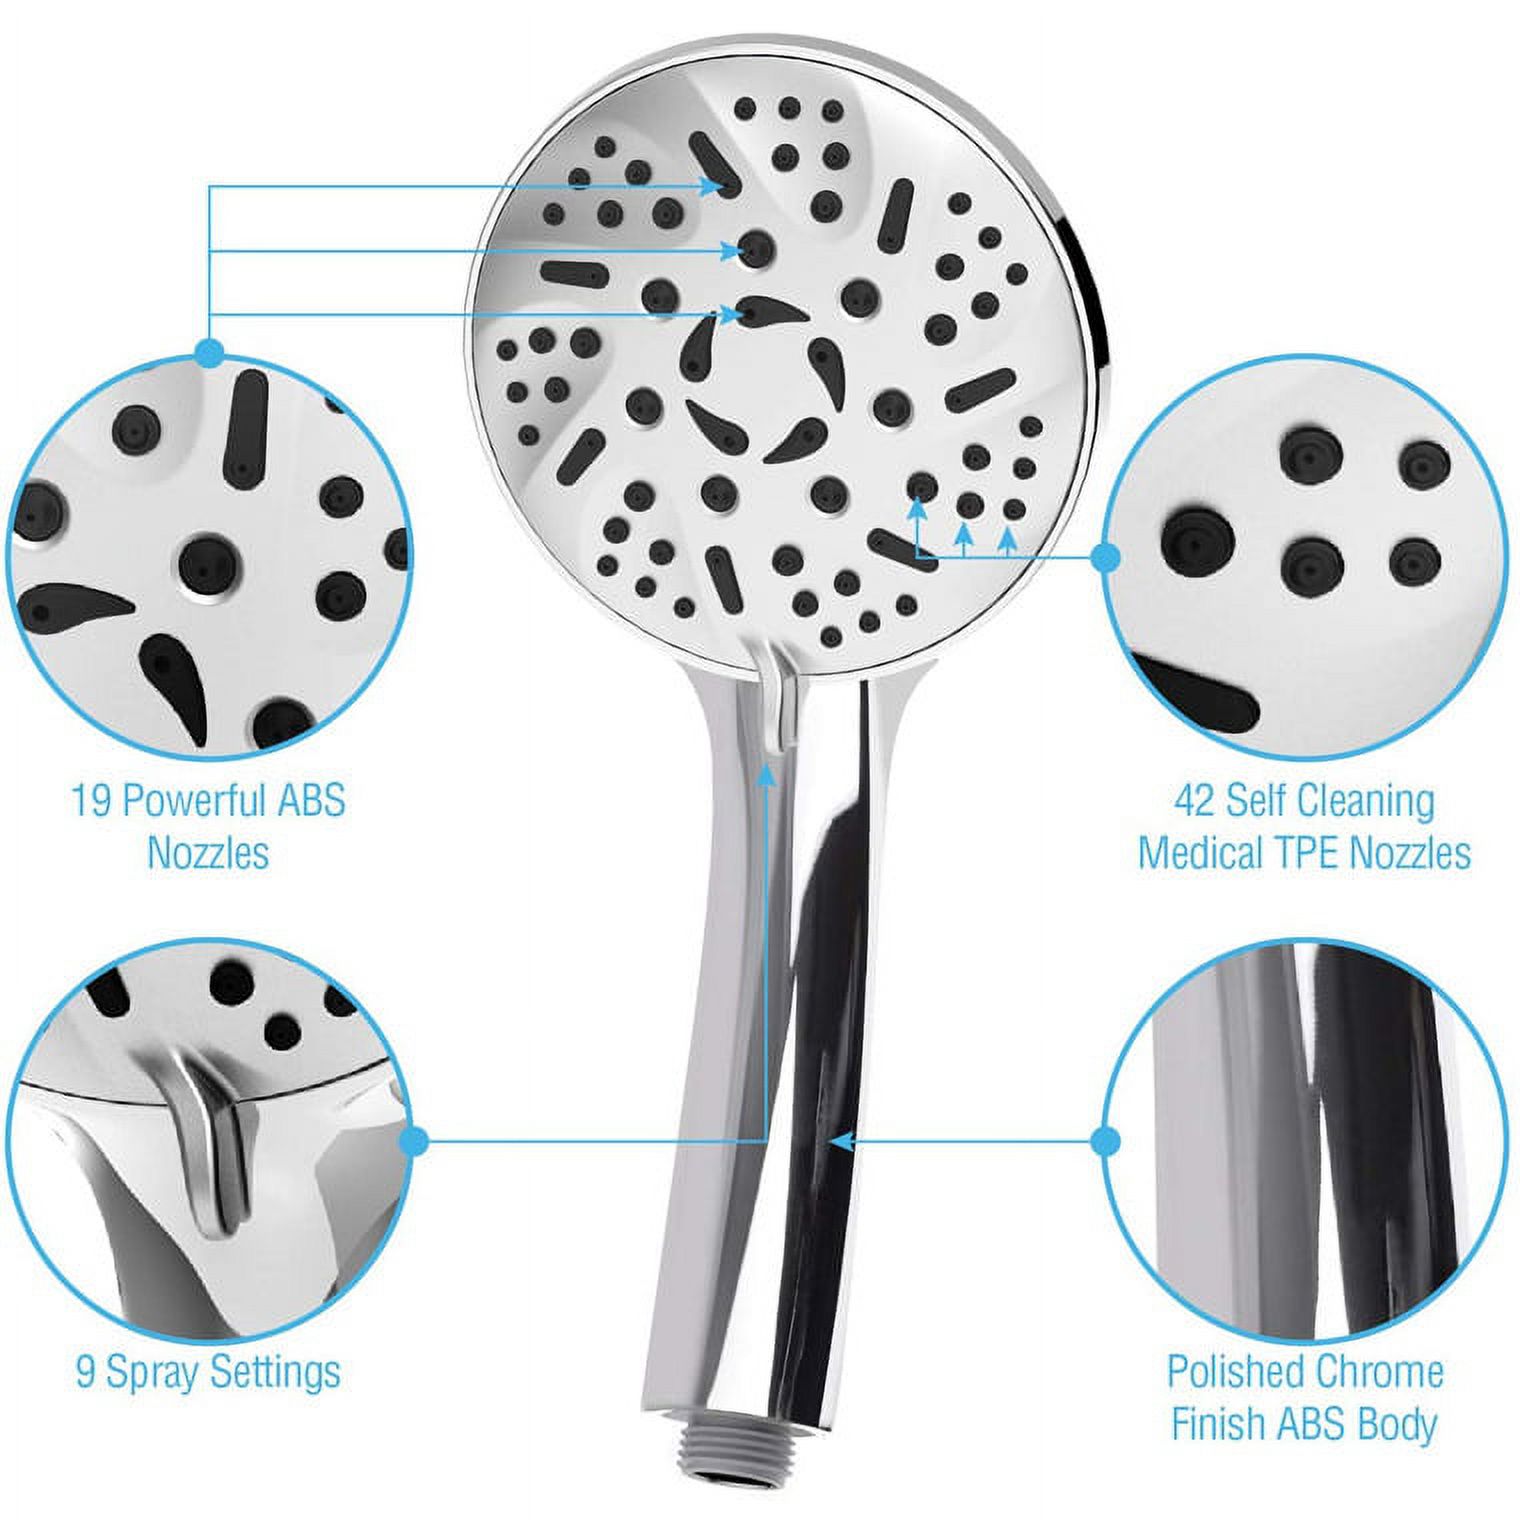 AQwzh High Pressure Handheld Shower Head – 9 Spray Modes with 60 Inch Hose (Chrome) - image 3 of 8